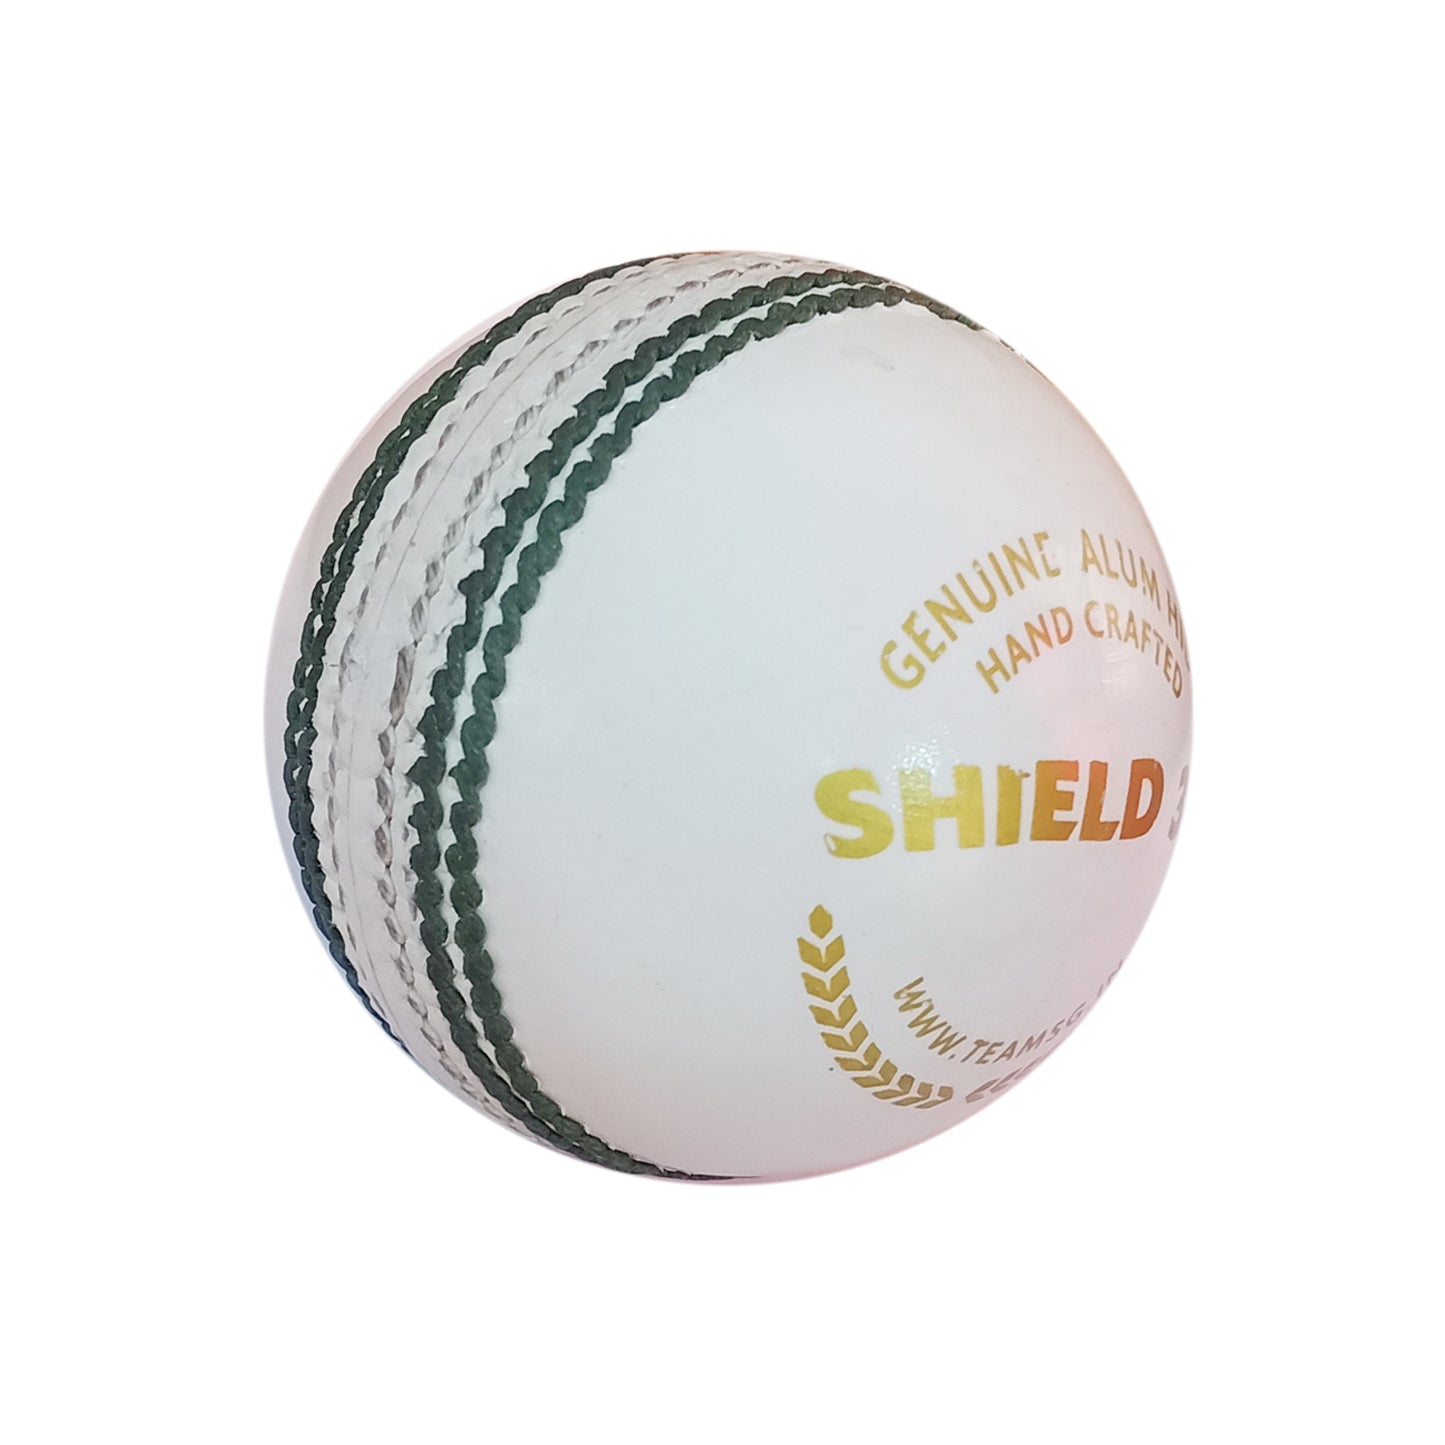 SG Shield 30 Cricket Ball for Adult, White - 1PC - Best Price online Prokicksports.com